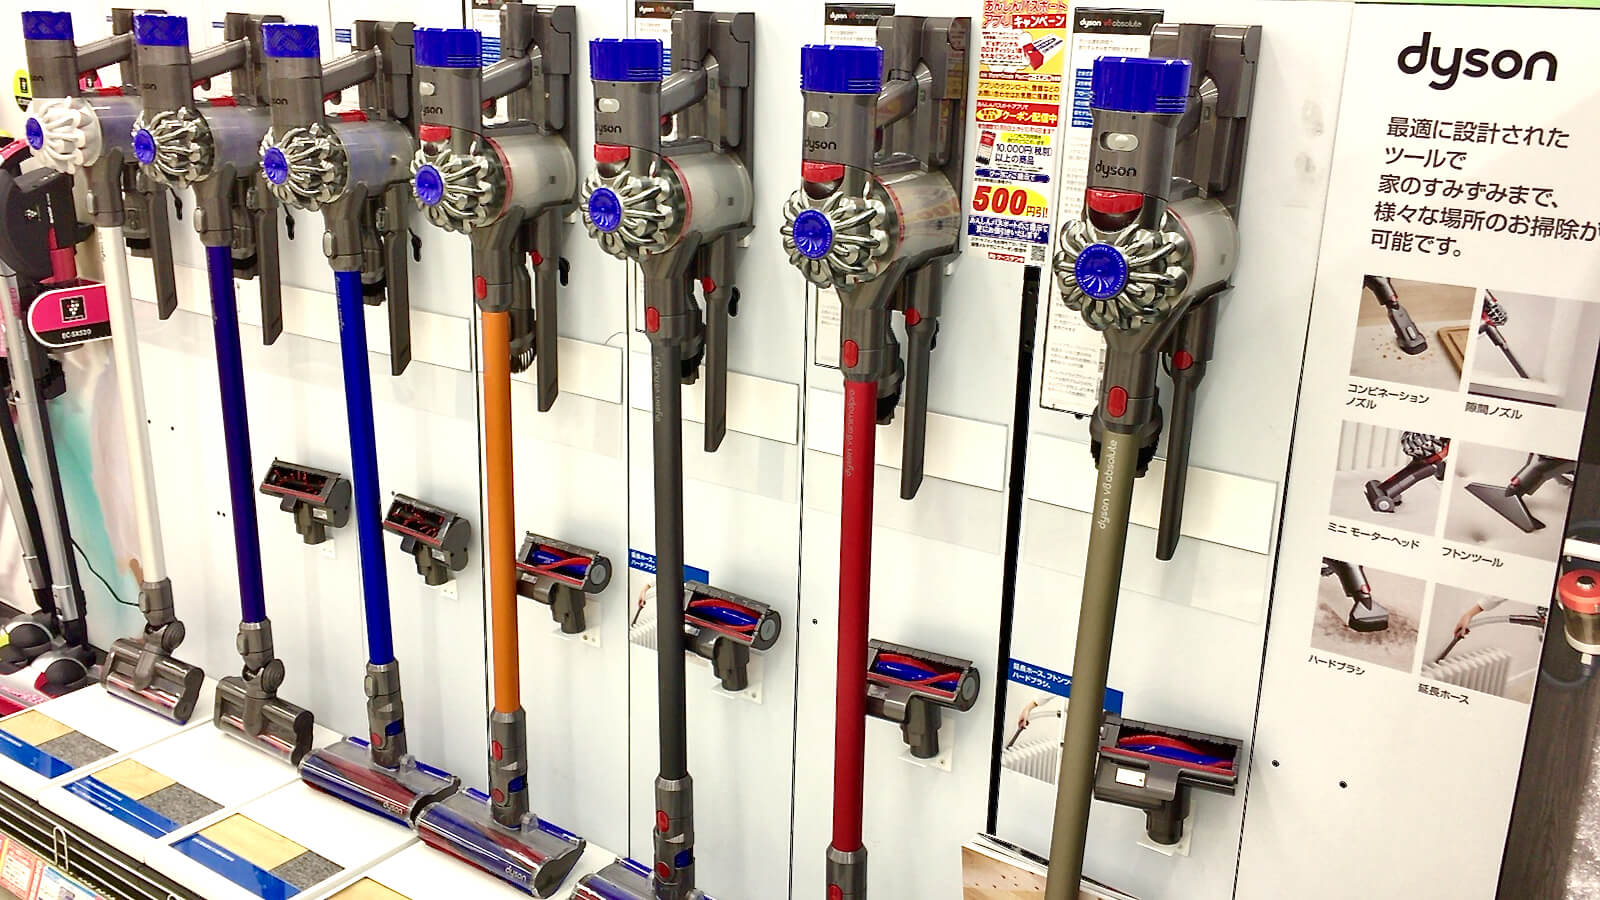 Dyson displayed at mass retailers